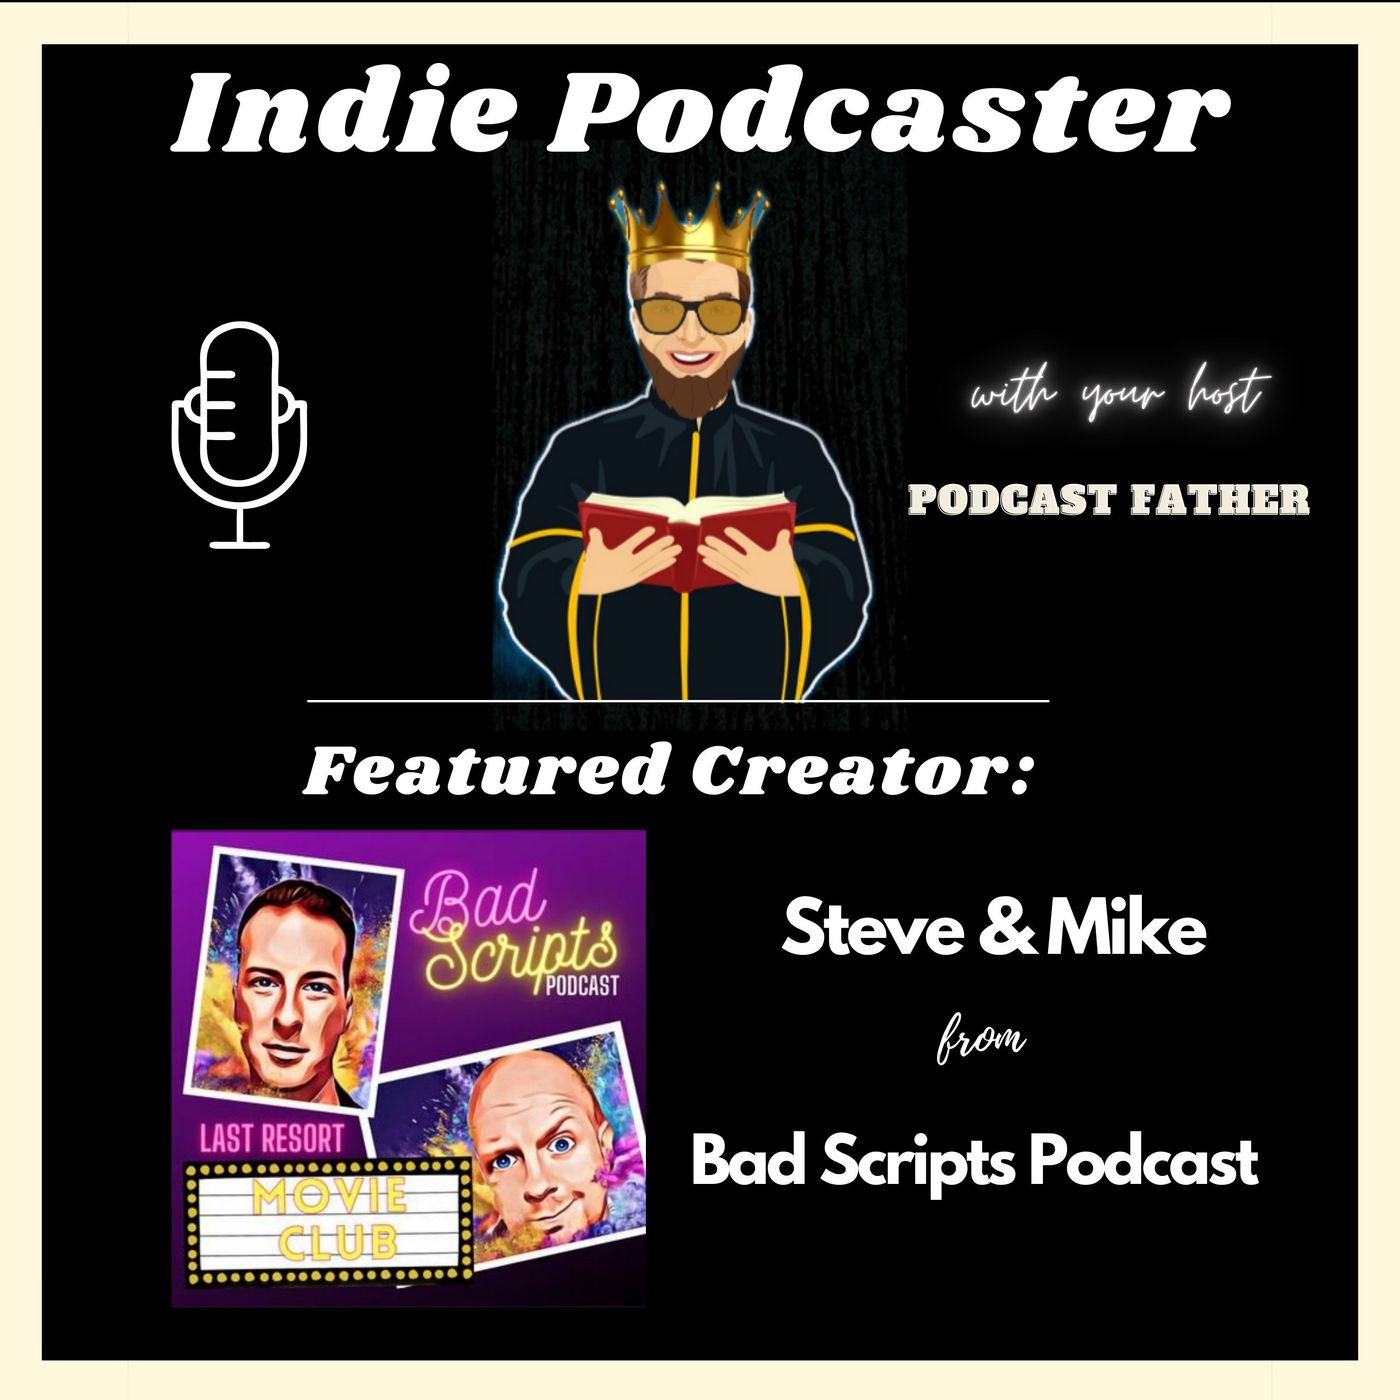 Steve & Mike from Bad Scripts Podcast